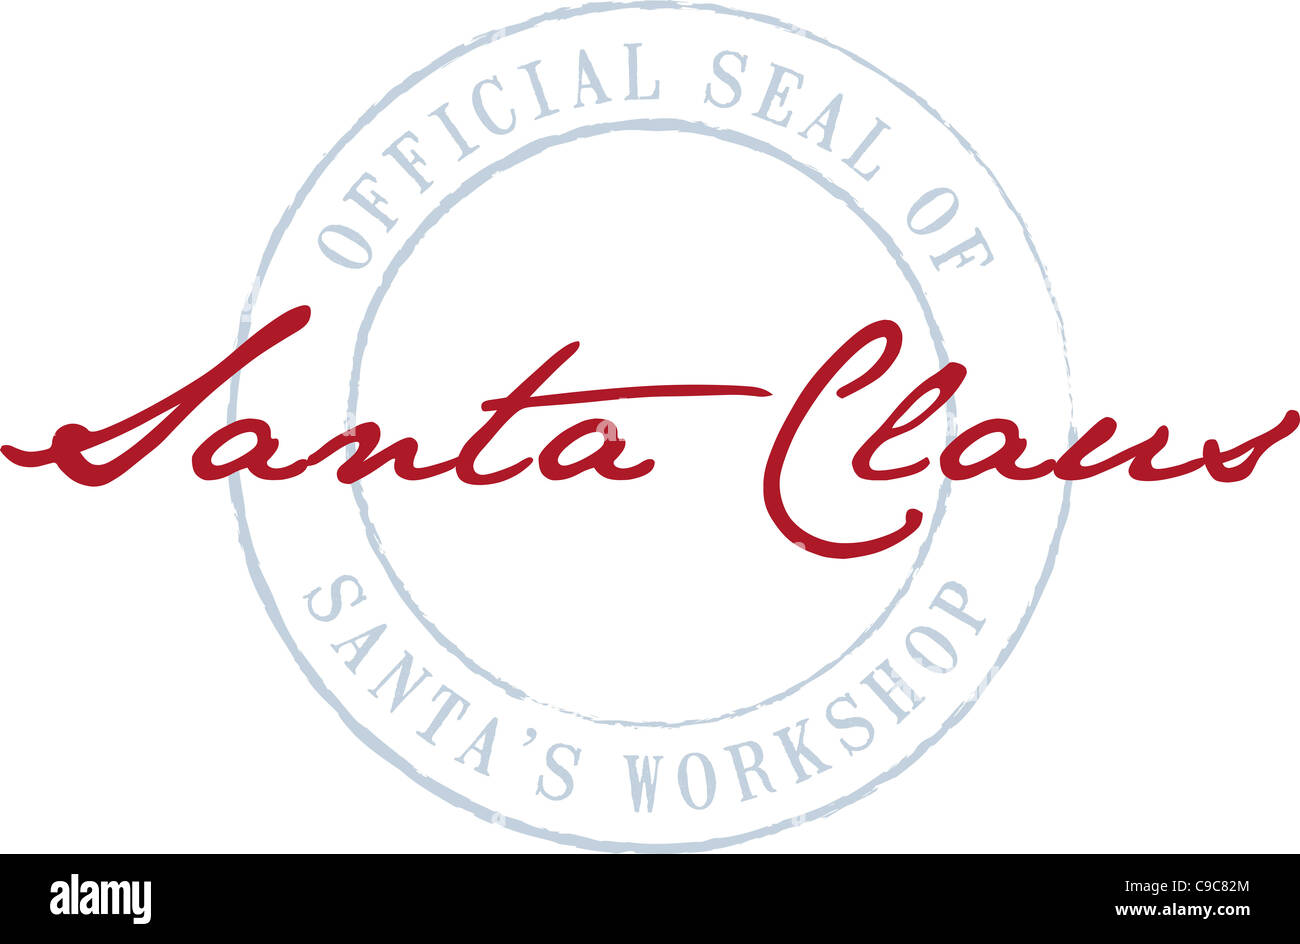 Santa Claus's red signature is signed on top of the circular official seal of Santa's workshop which is a faded gray color. Stock Photo